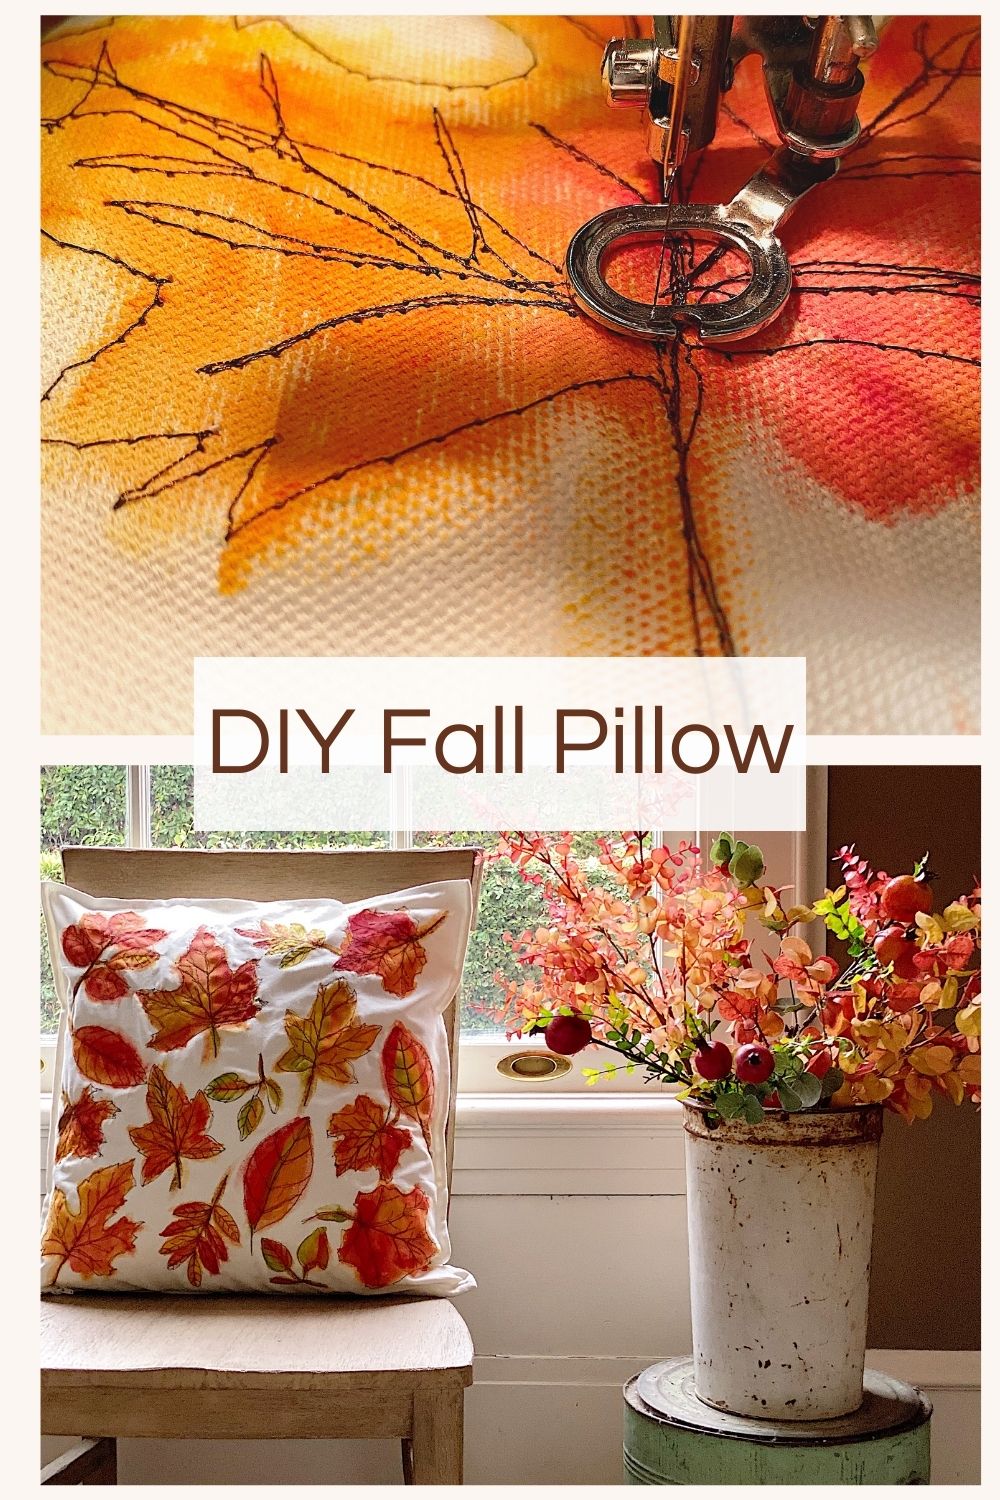 I love the new DIY Pillow that I made with paint and Free Motion Embroidery! I Combined Two Of My Favorite Passions, Art And Sewing. Now I have new Painted Fall Pillows.